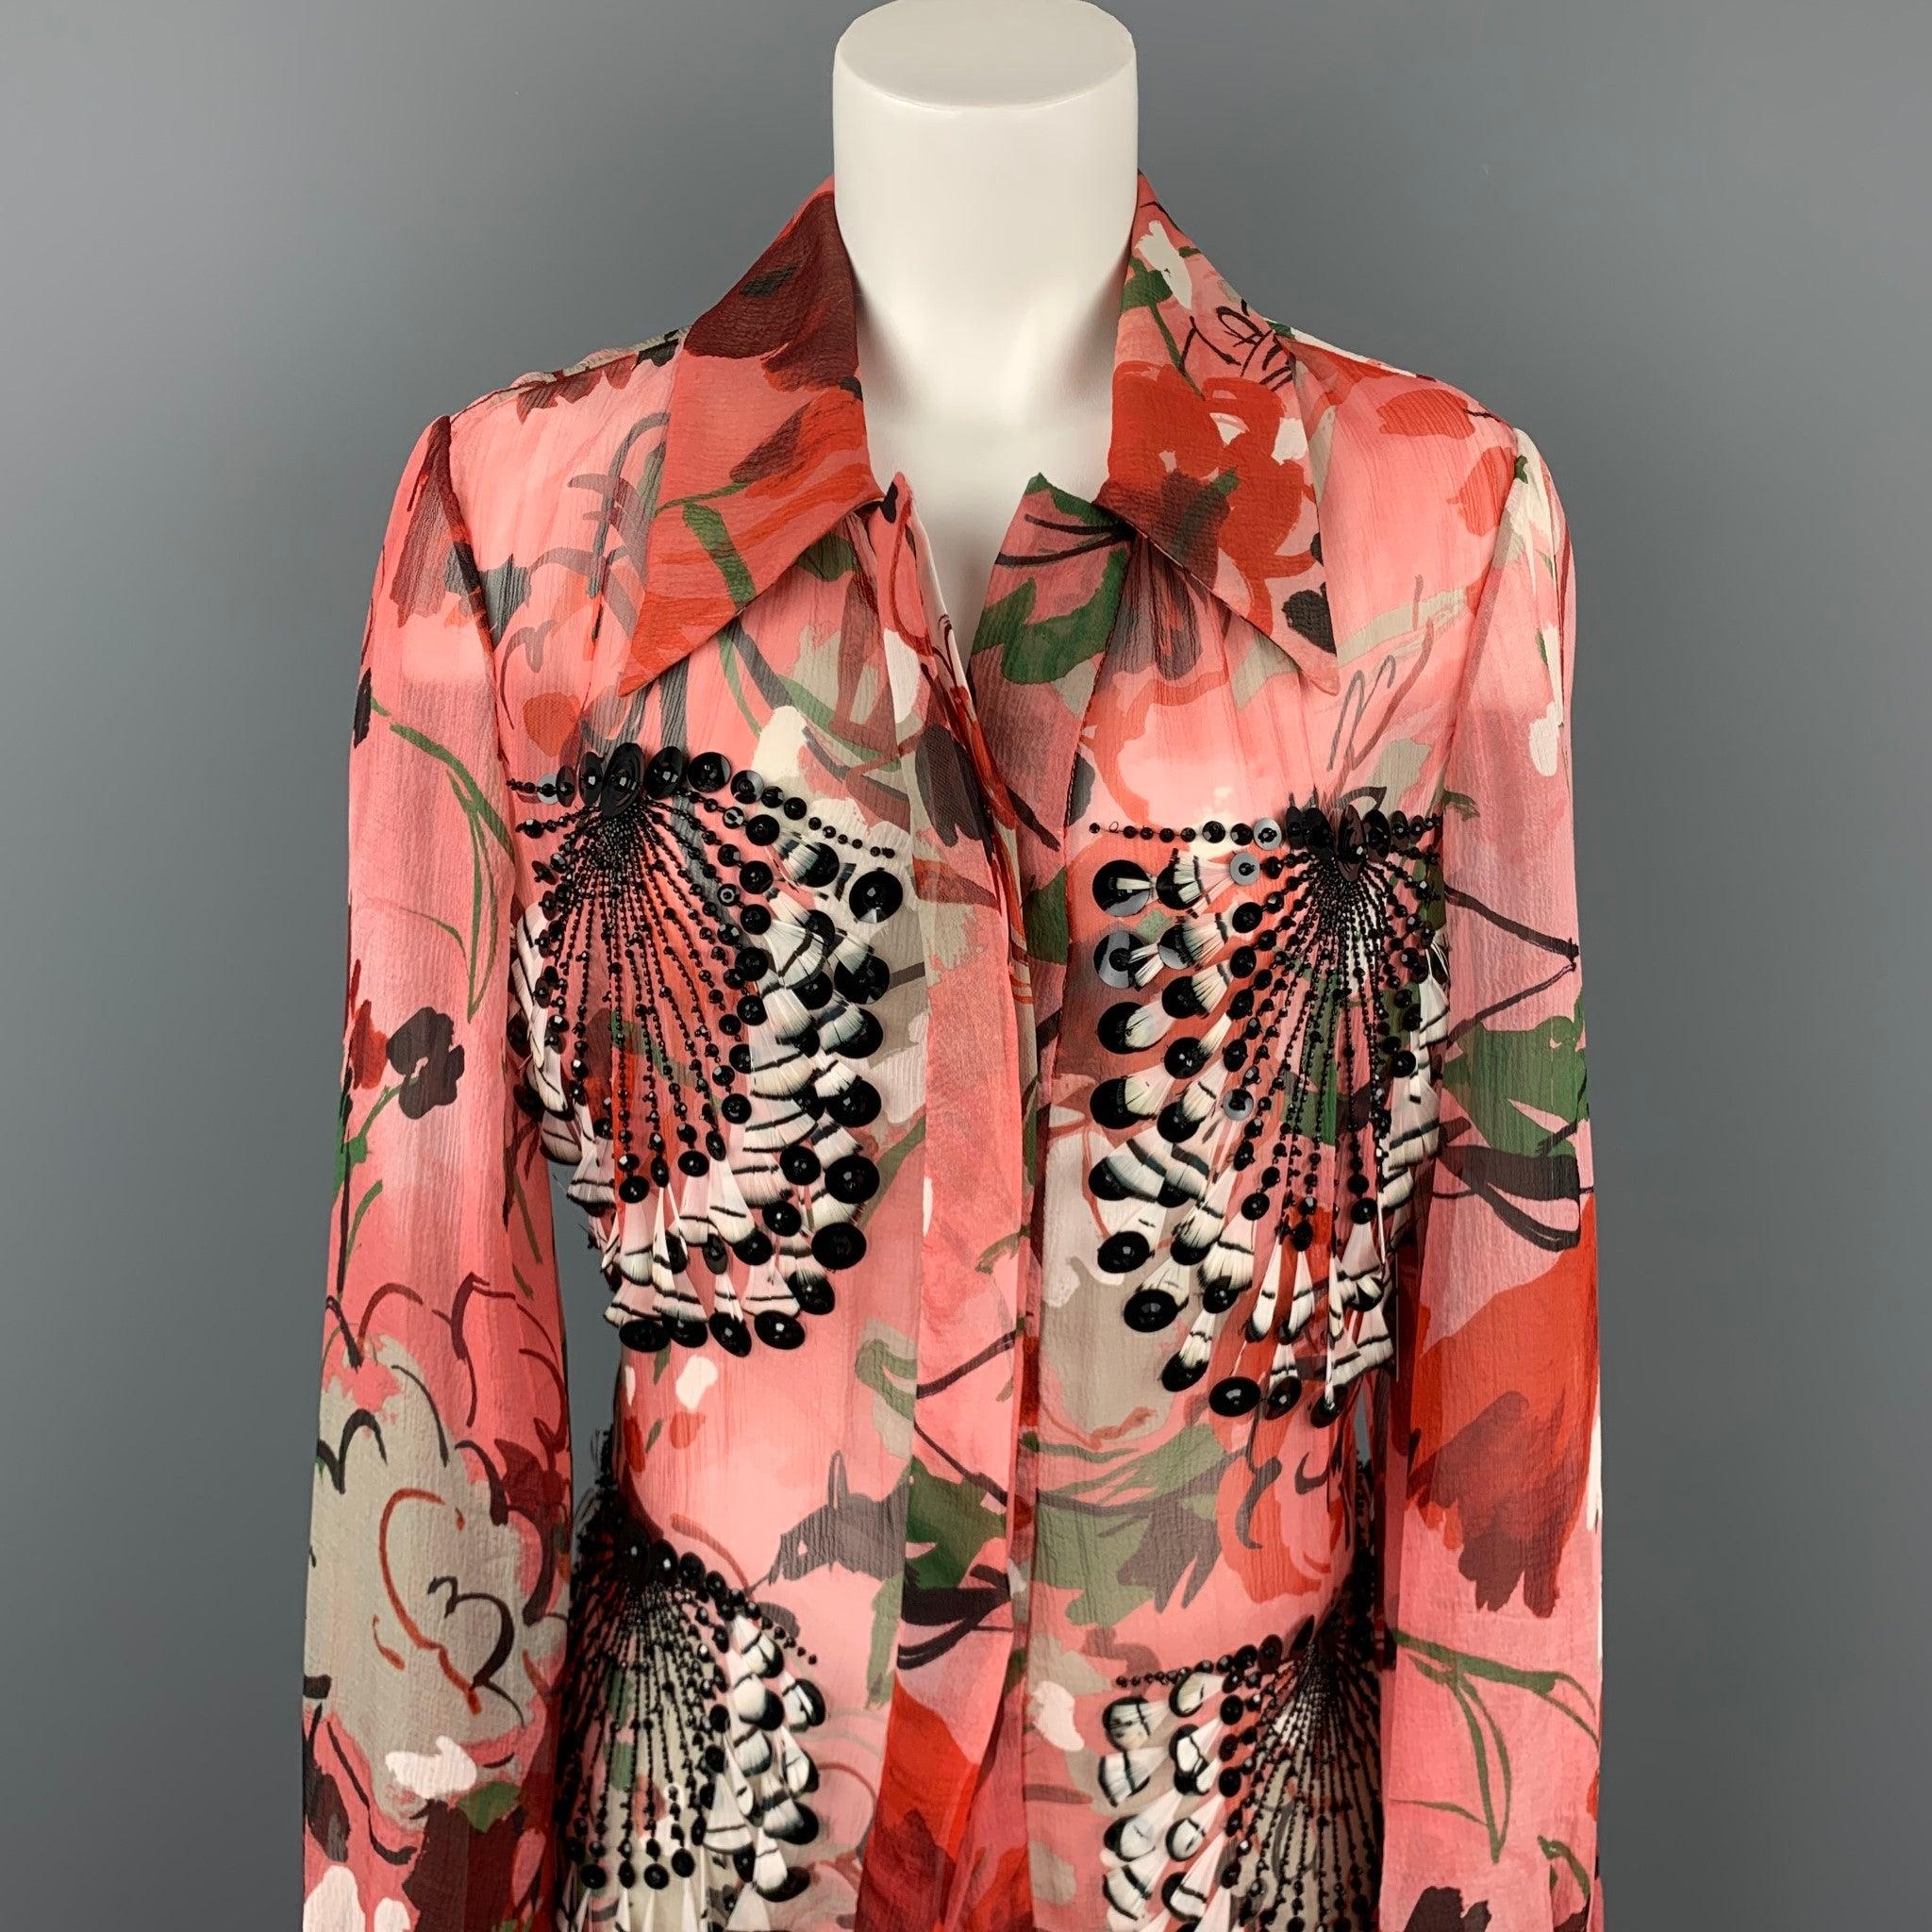 CAROLINA HERRERA jacket comes in a pink print silk with beaded and feather details featuring a back tie up detail, mesh lined, pointed collar, and a hidden button closure. Missing buttons. As-Is. Made in USA.Very Good
Pre-Owned Condition. 

Marked: 